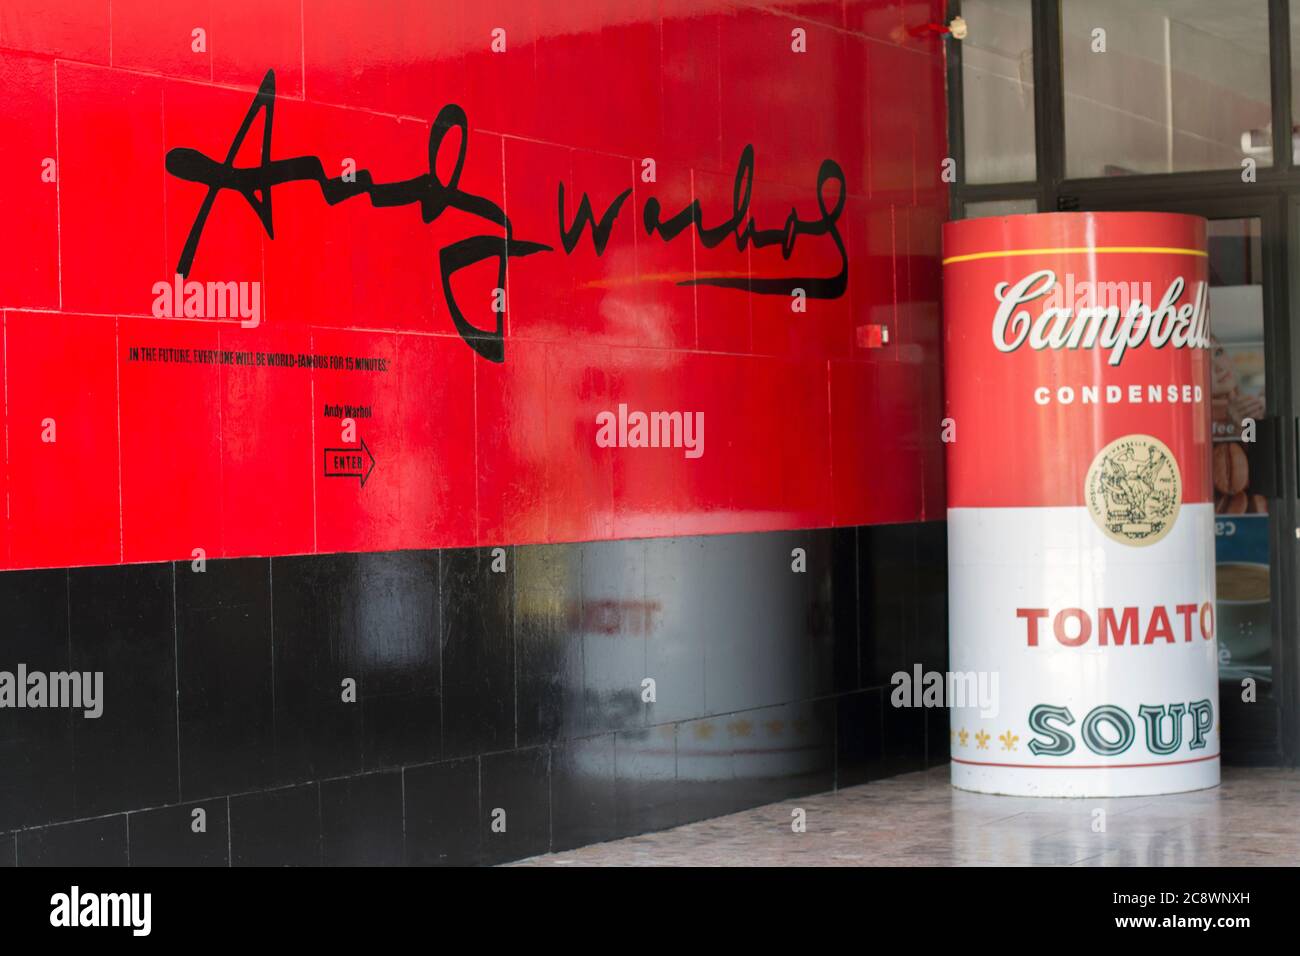 Medzilaborce Slovakia June 04, 2020 Andy Warhol Museum of Modern Art. Huge Campbell condensed tomato soup installation welcomes visitors. Stock Photo